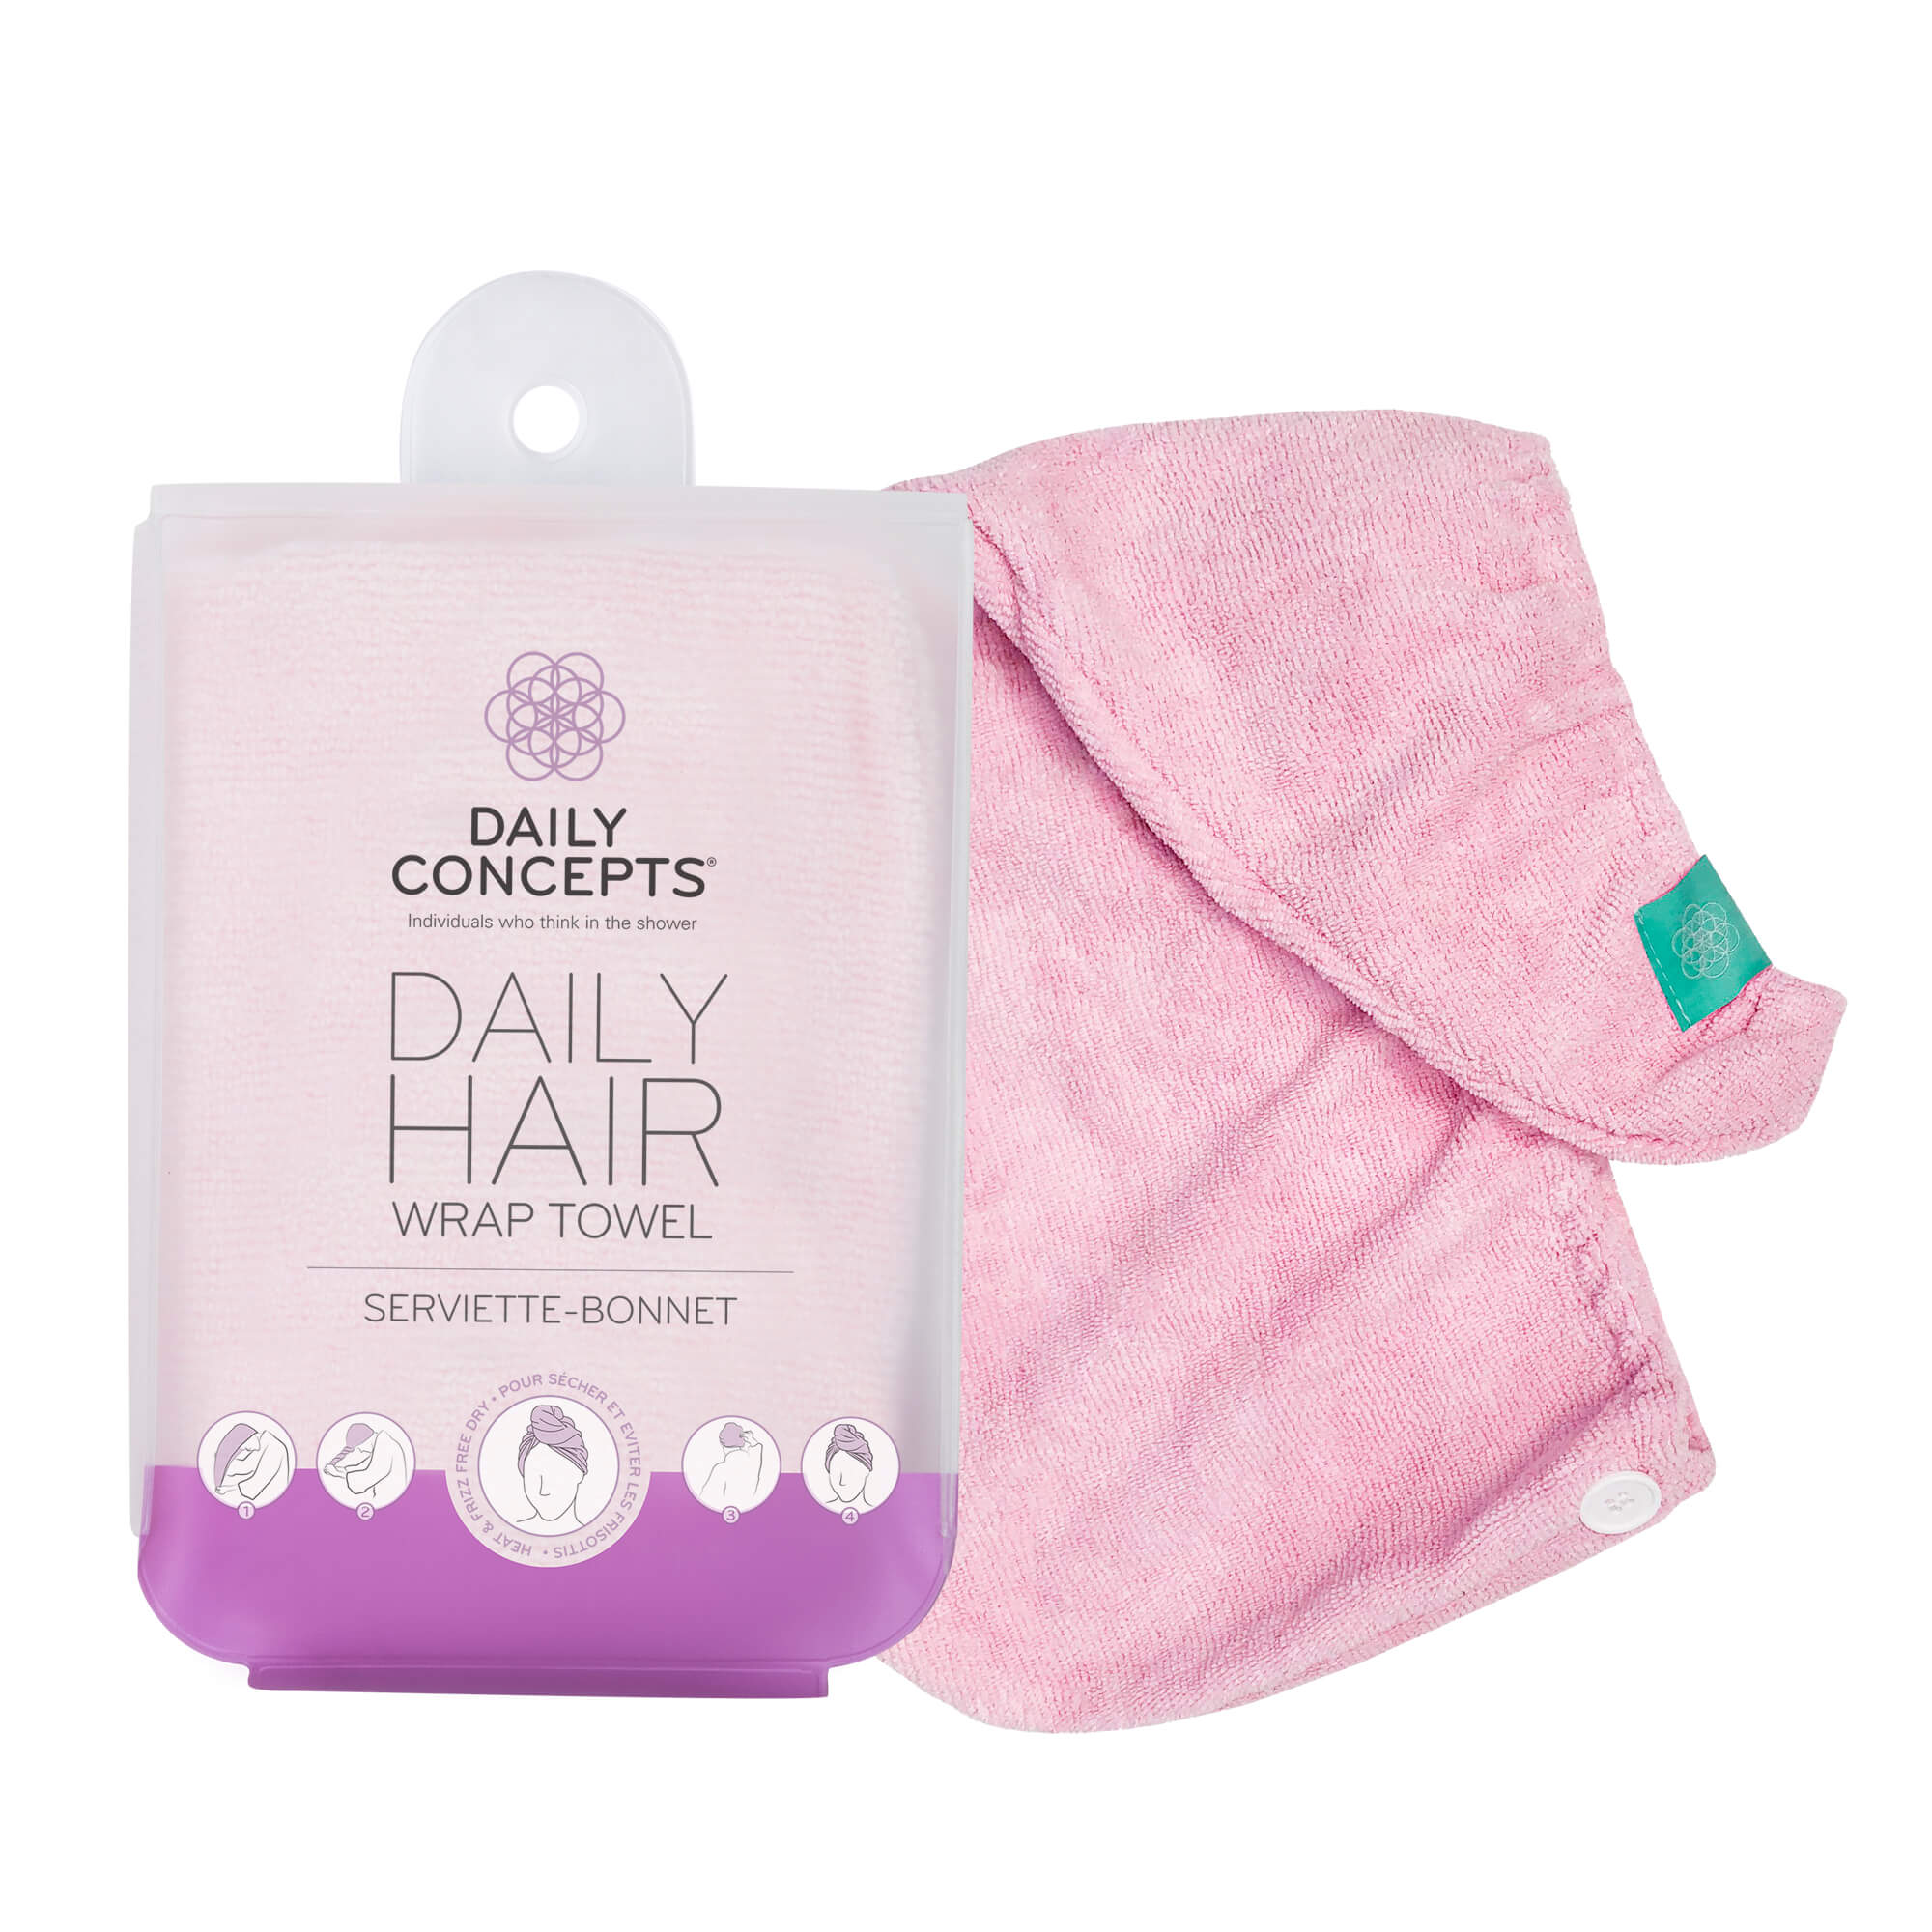 Daily Hair Towel Wrap by Daily Concepts luxury Spa goods – DAILY